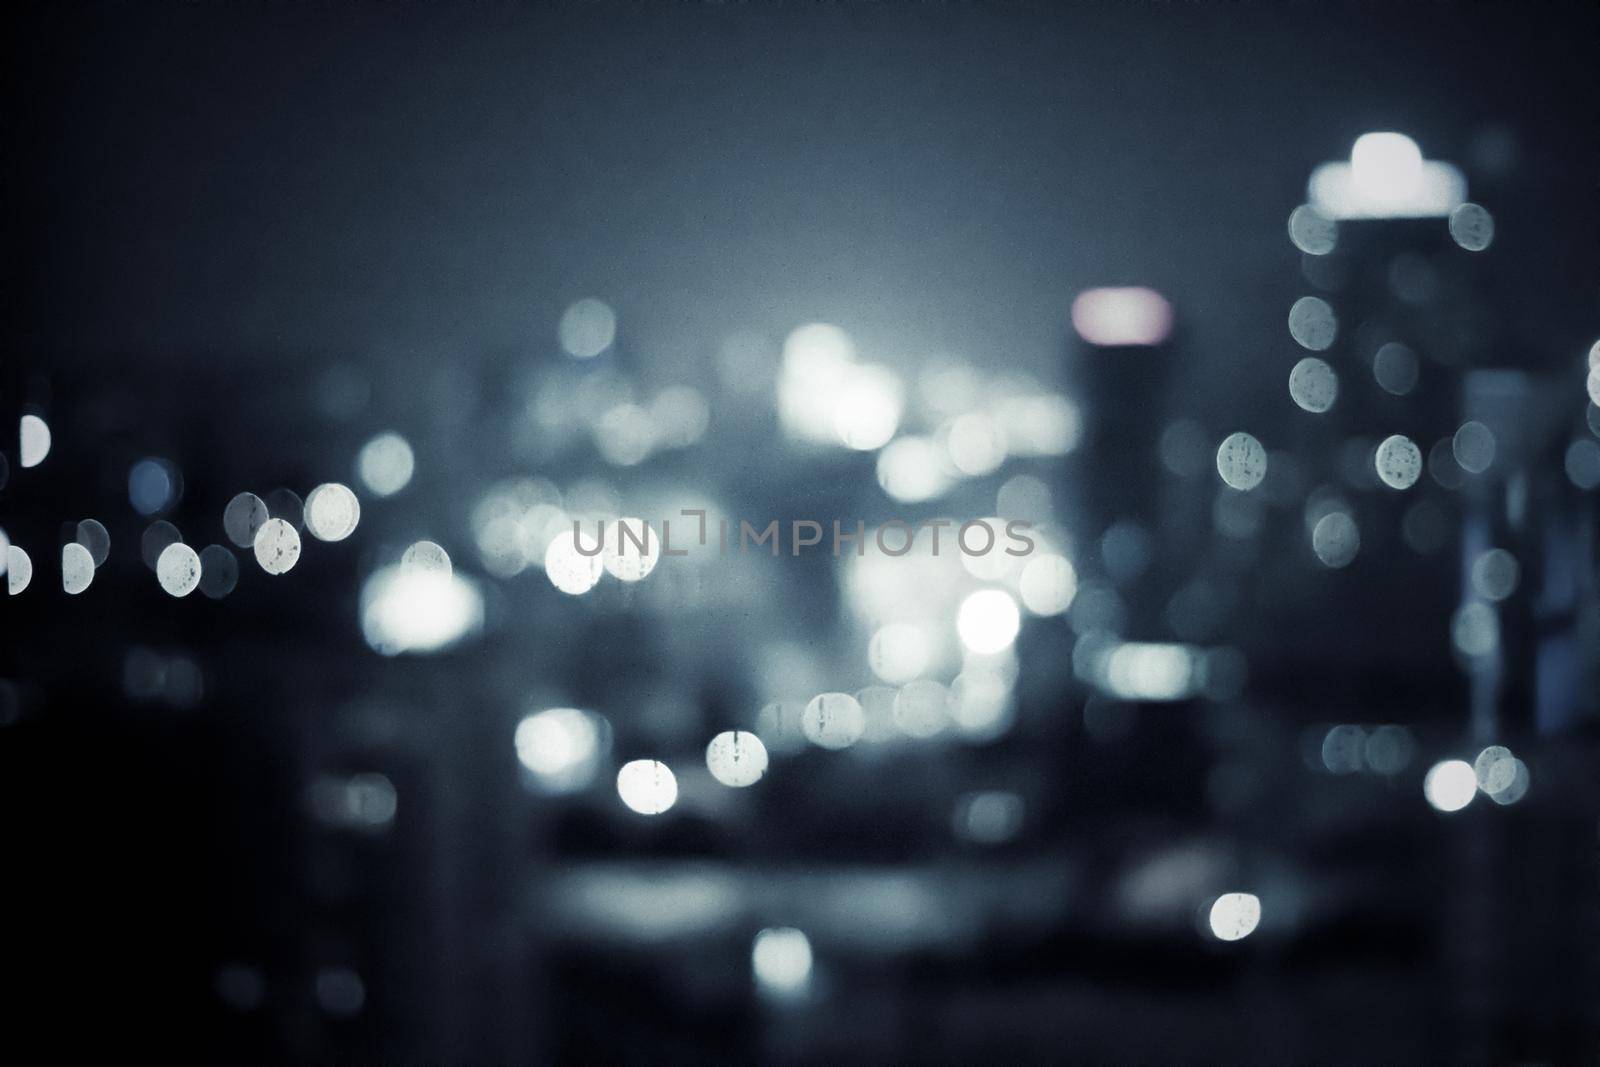 Big metropolitan city lights at night, blurry background - night life, abstract background and modern dark tones concept